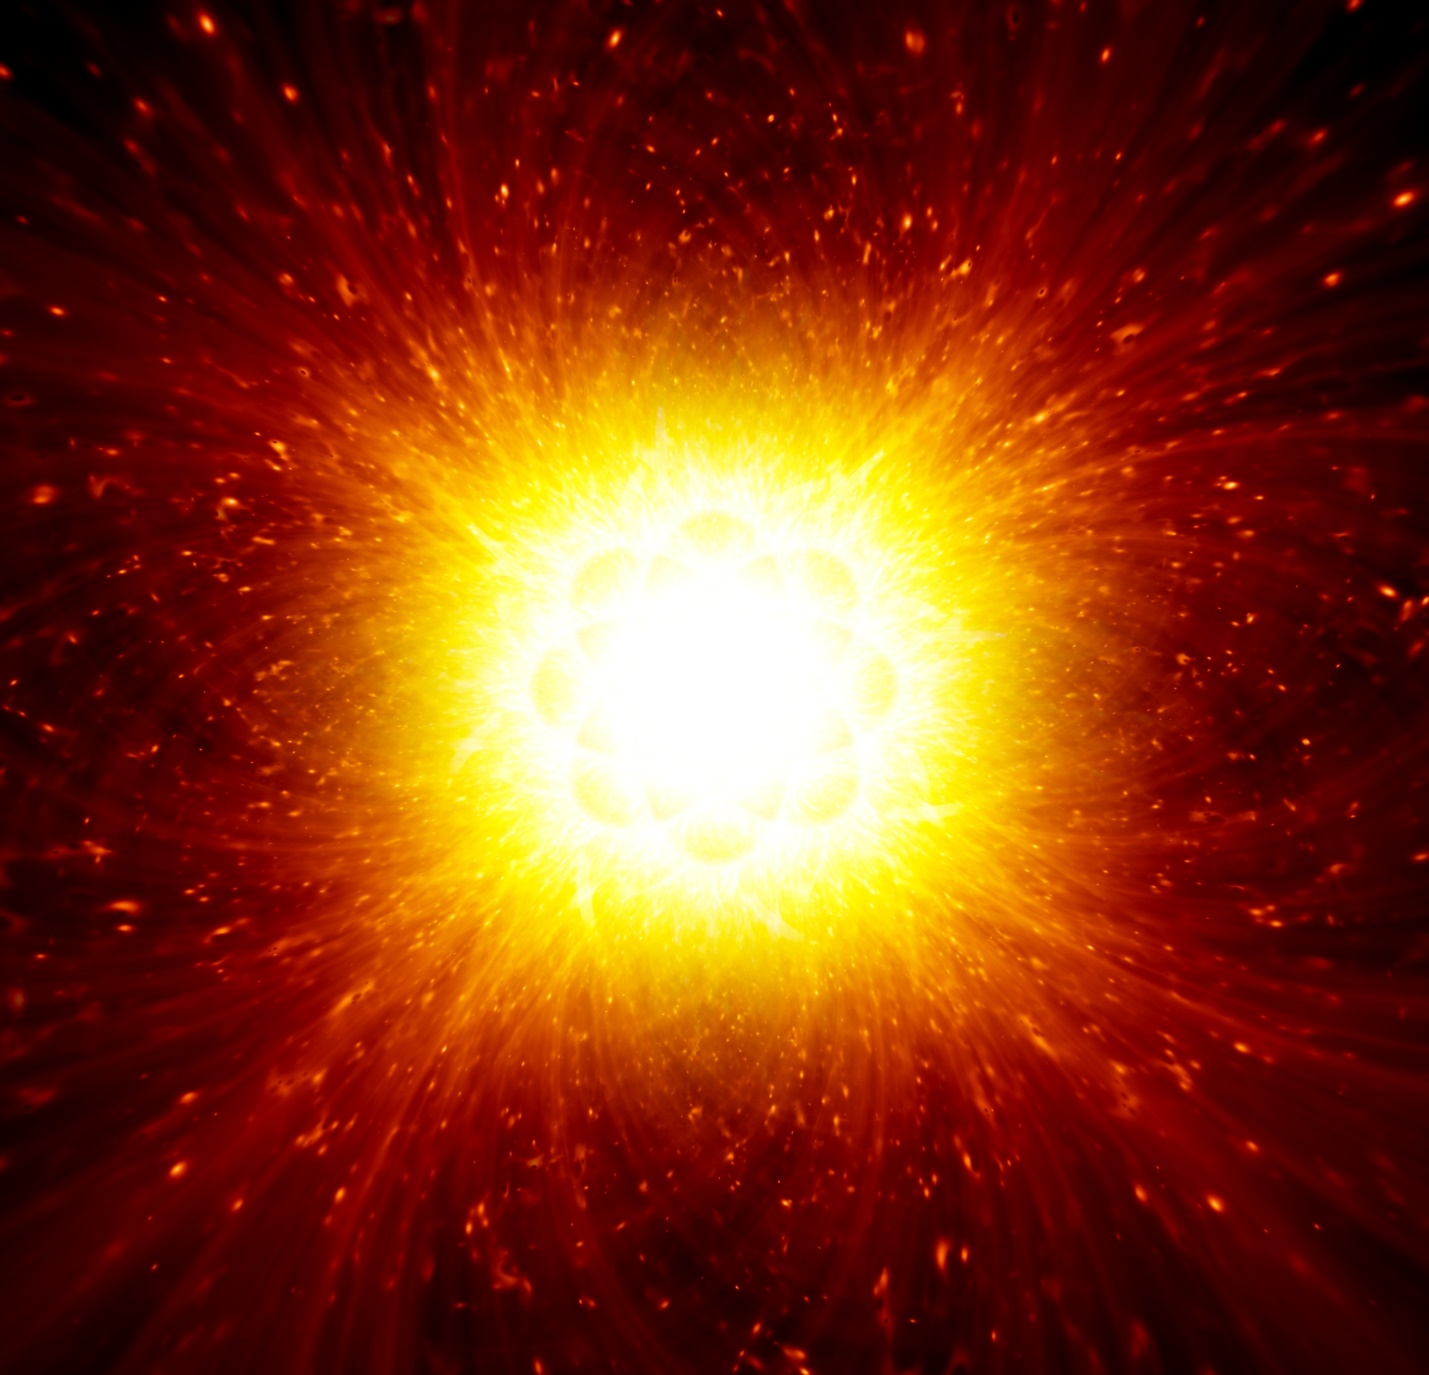 A bright explosion in the sky

Description automatically generated